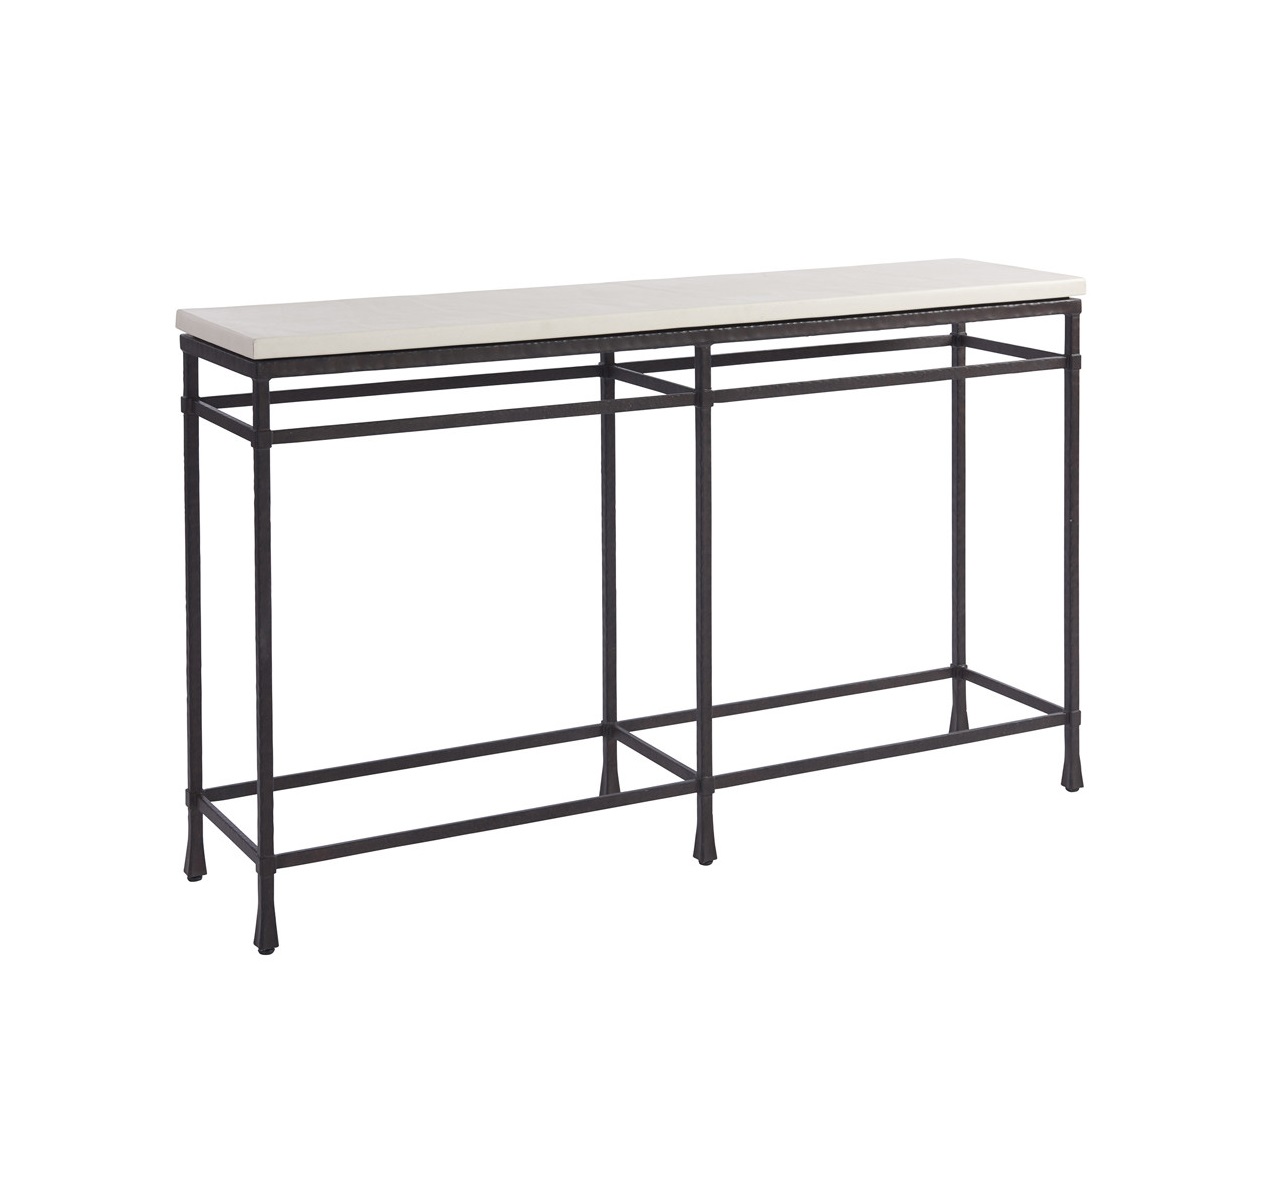 Breakwater Console, Lexington Console Table Online Brooklyn, New York, Furniture by ABD